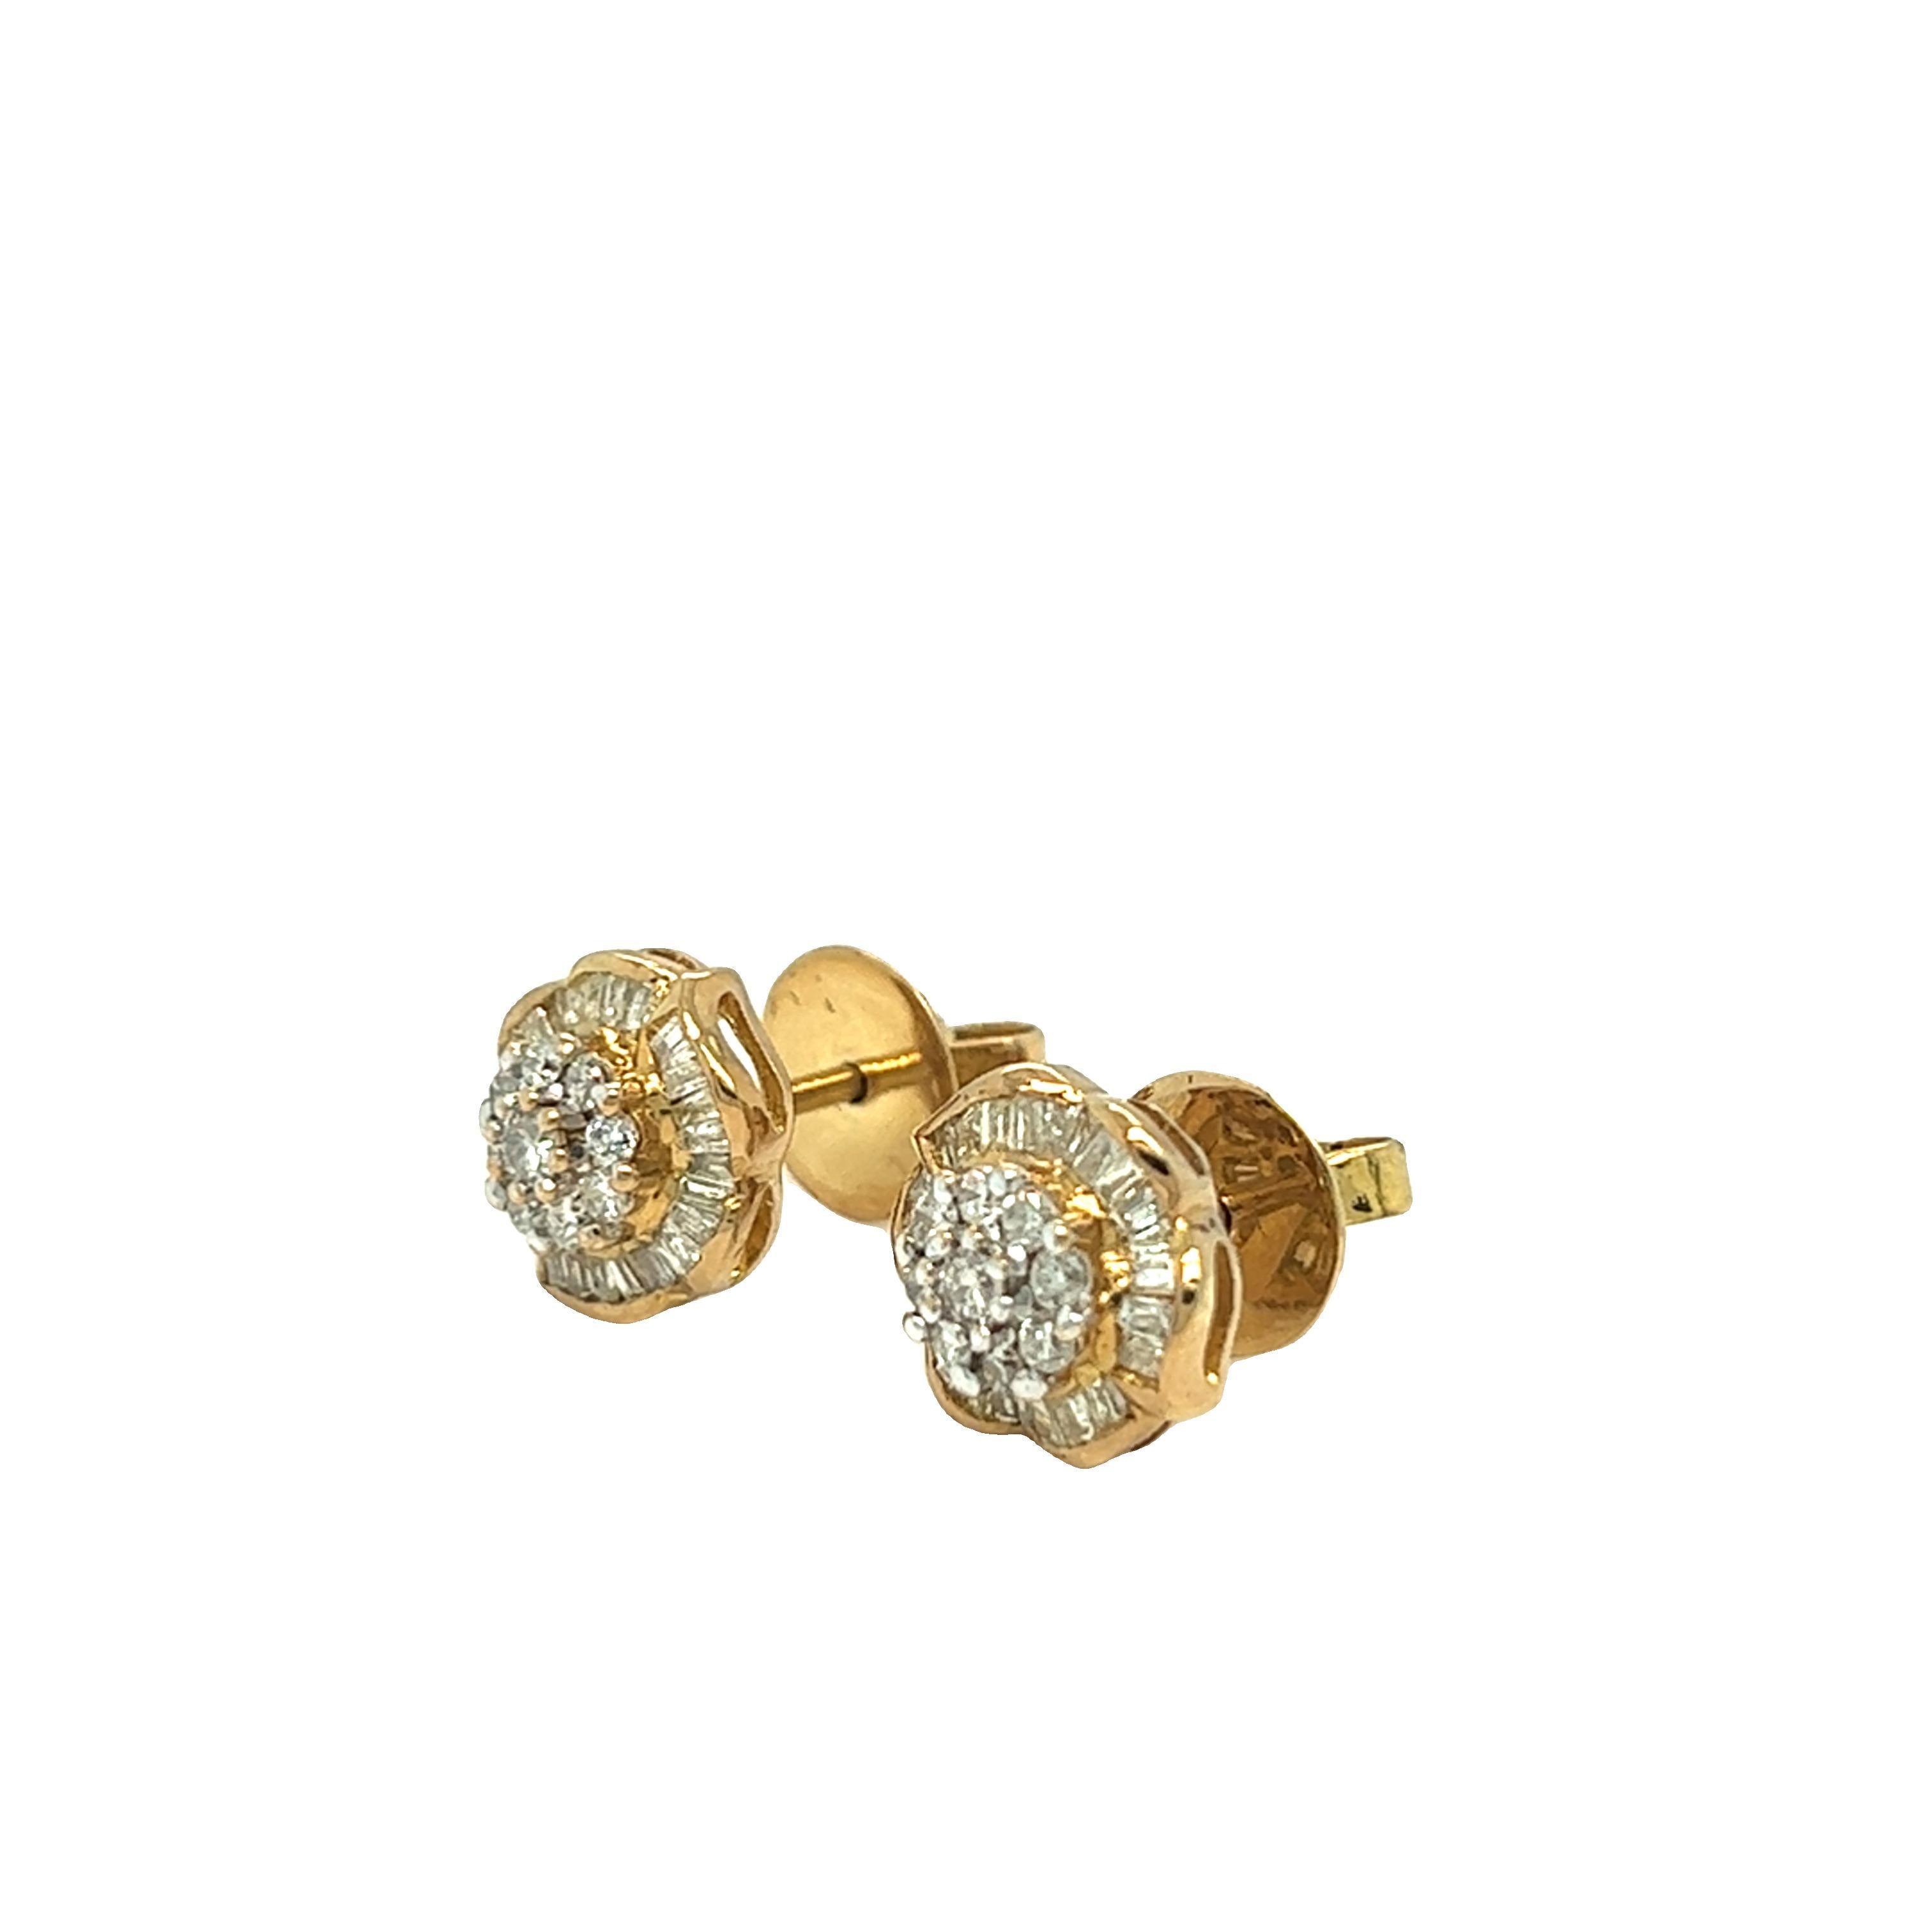 Round Cut Vintage Flower Cluster Round and Baguette Diamond Earrings 14k Yellow Gold